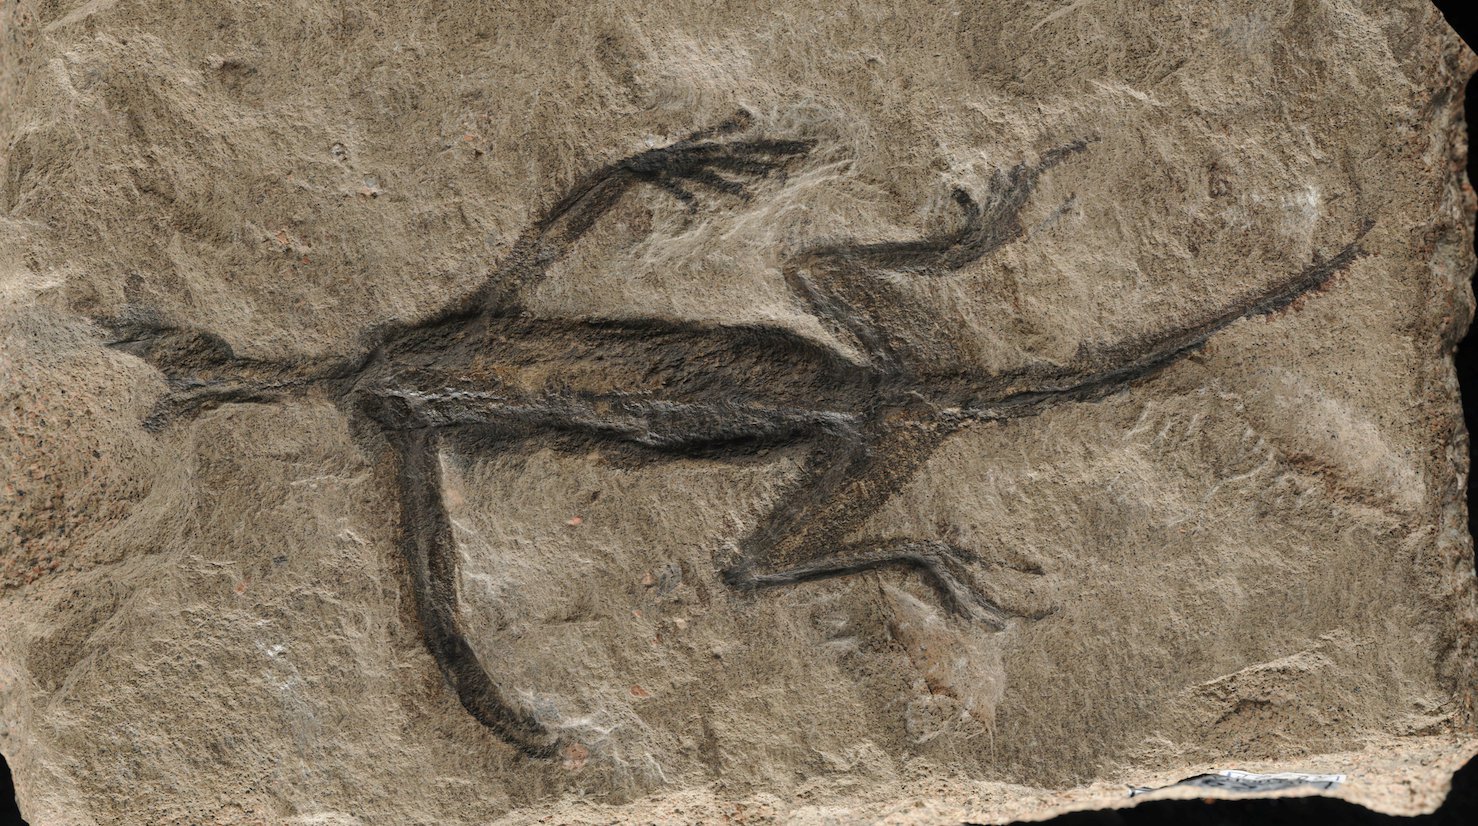 oldest reptile fossil is actually just a fake